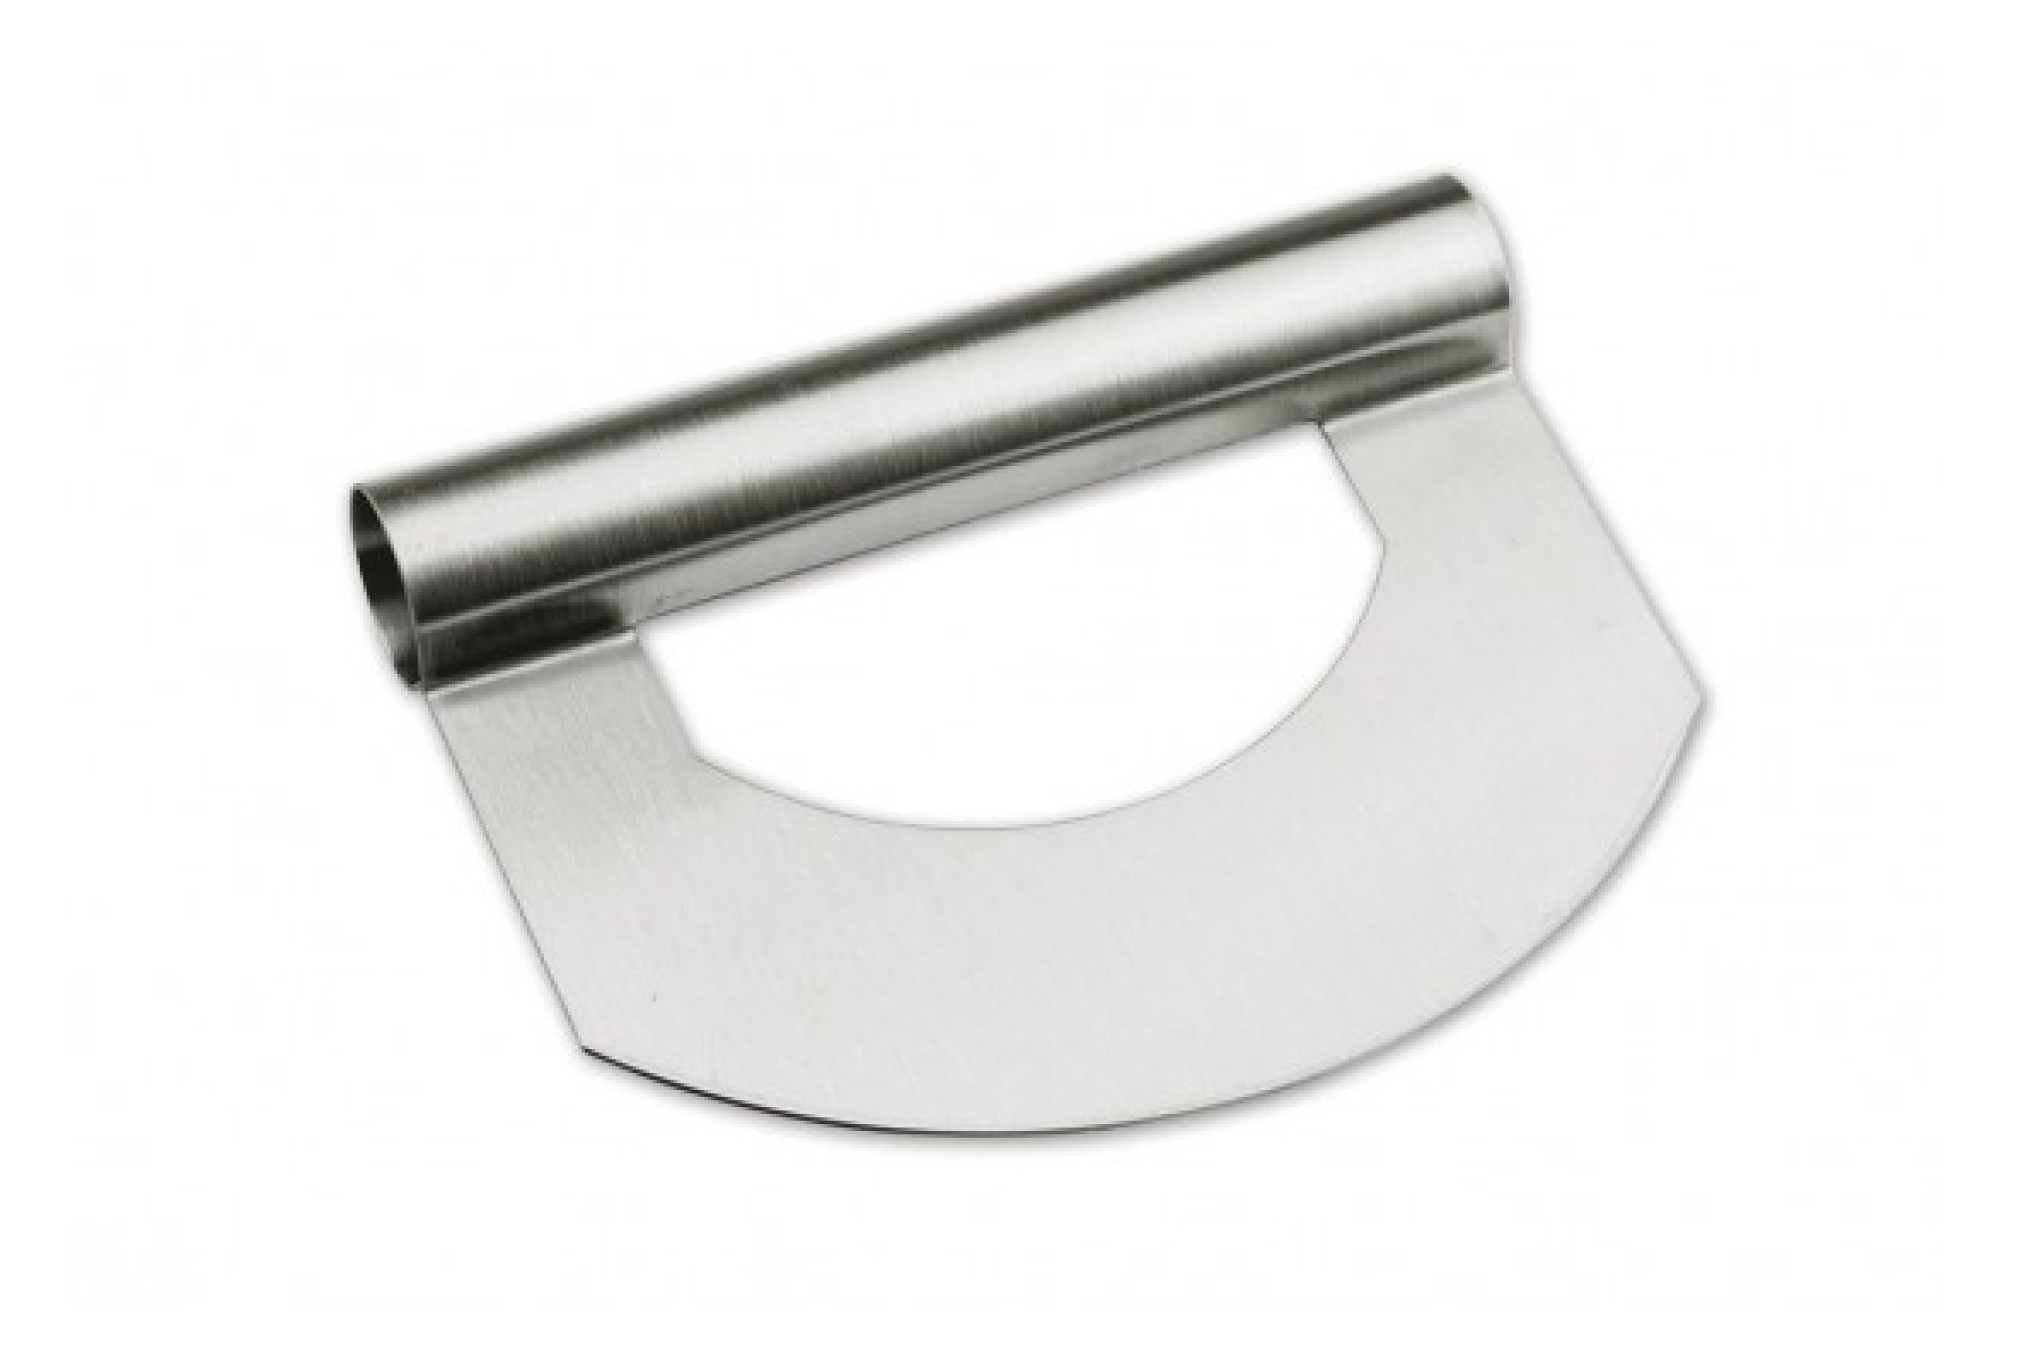 Stainless Steel Semicircular Dough Cutter - Miss Biscuit